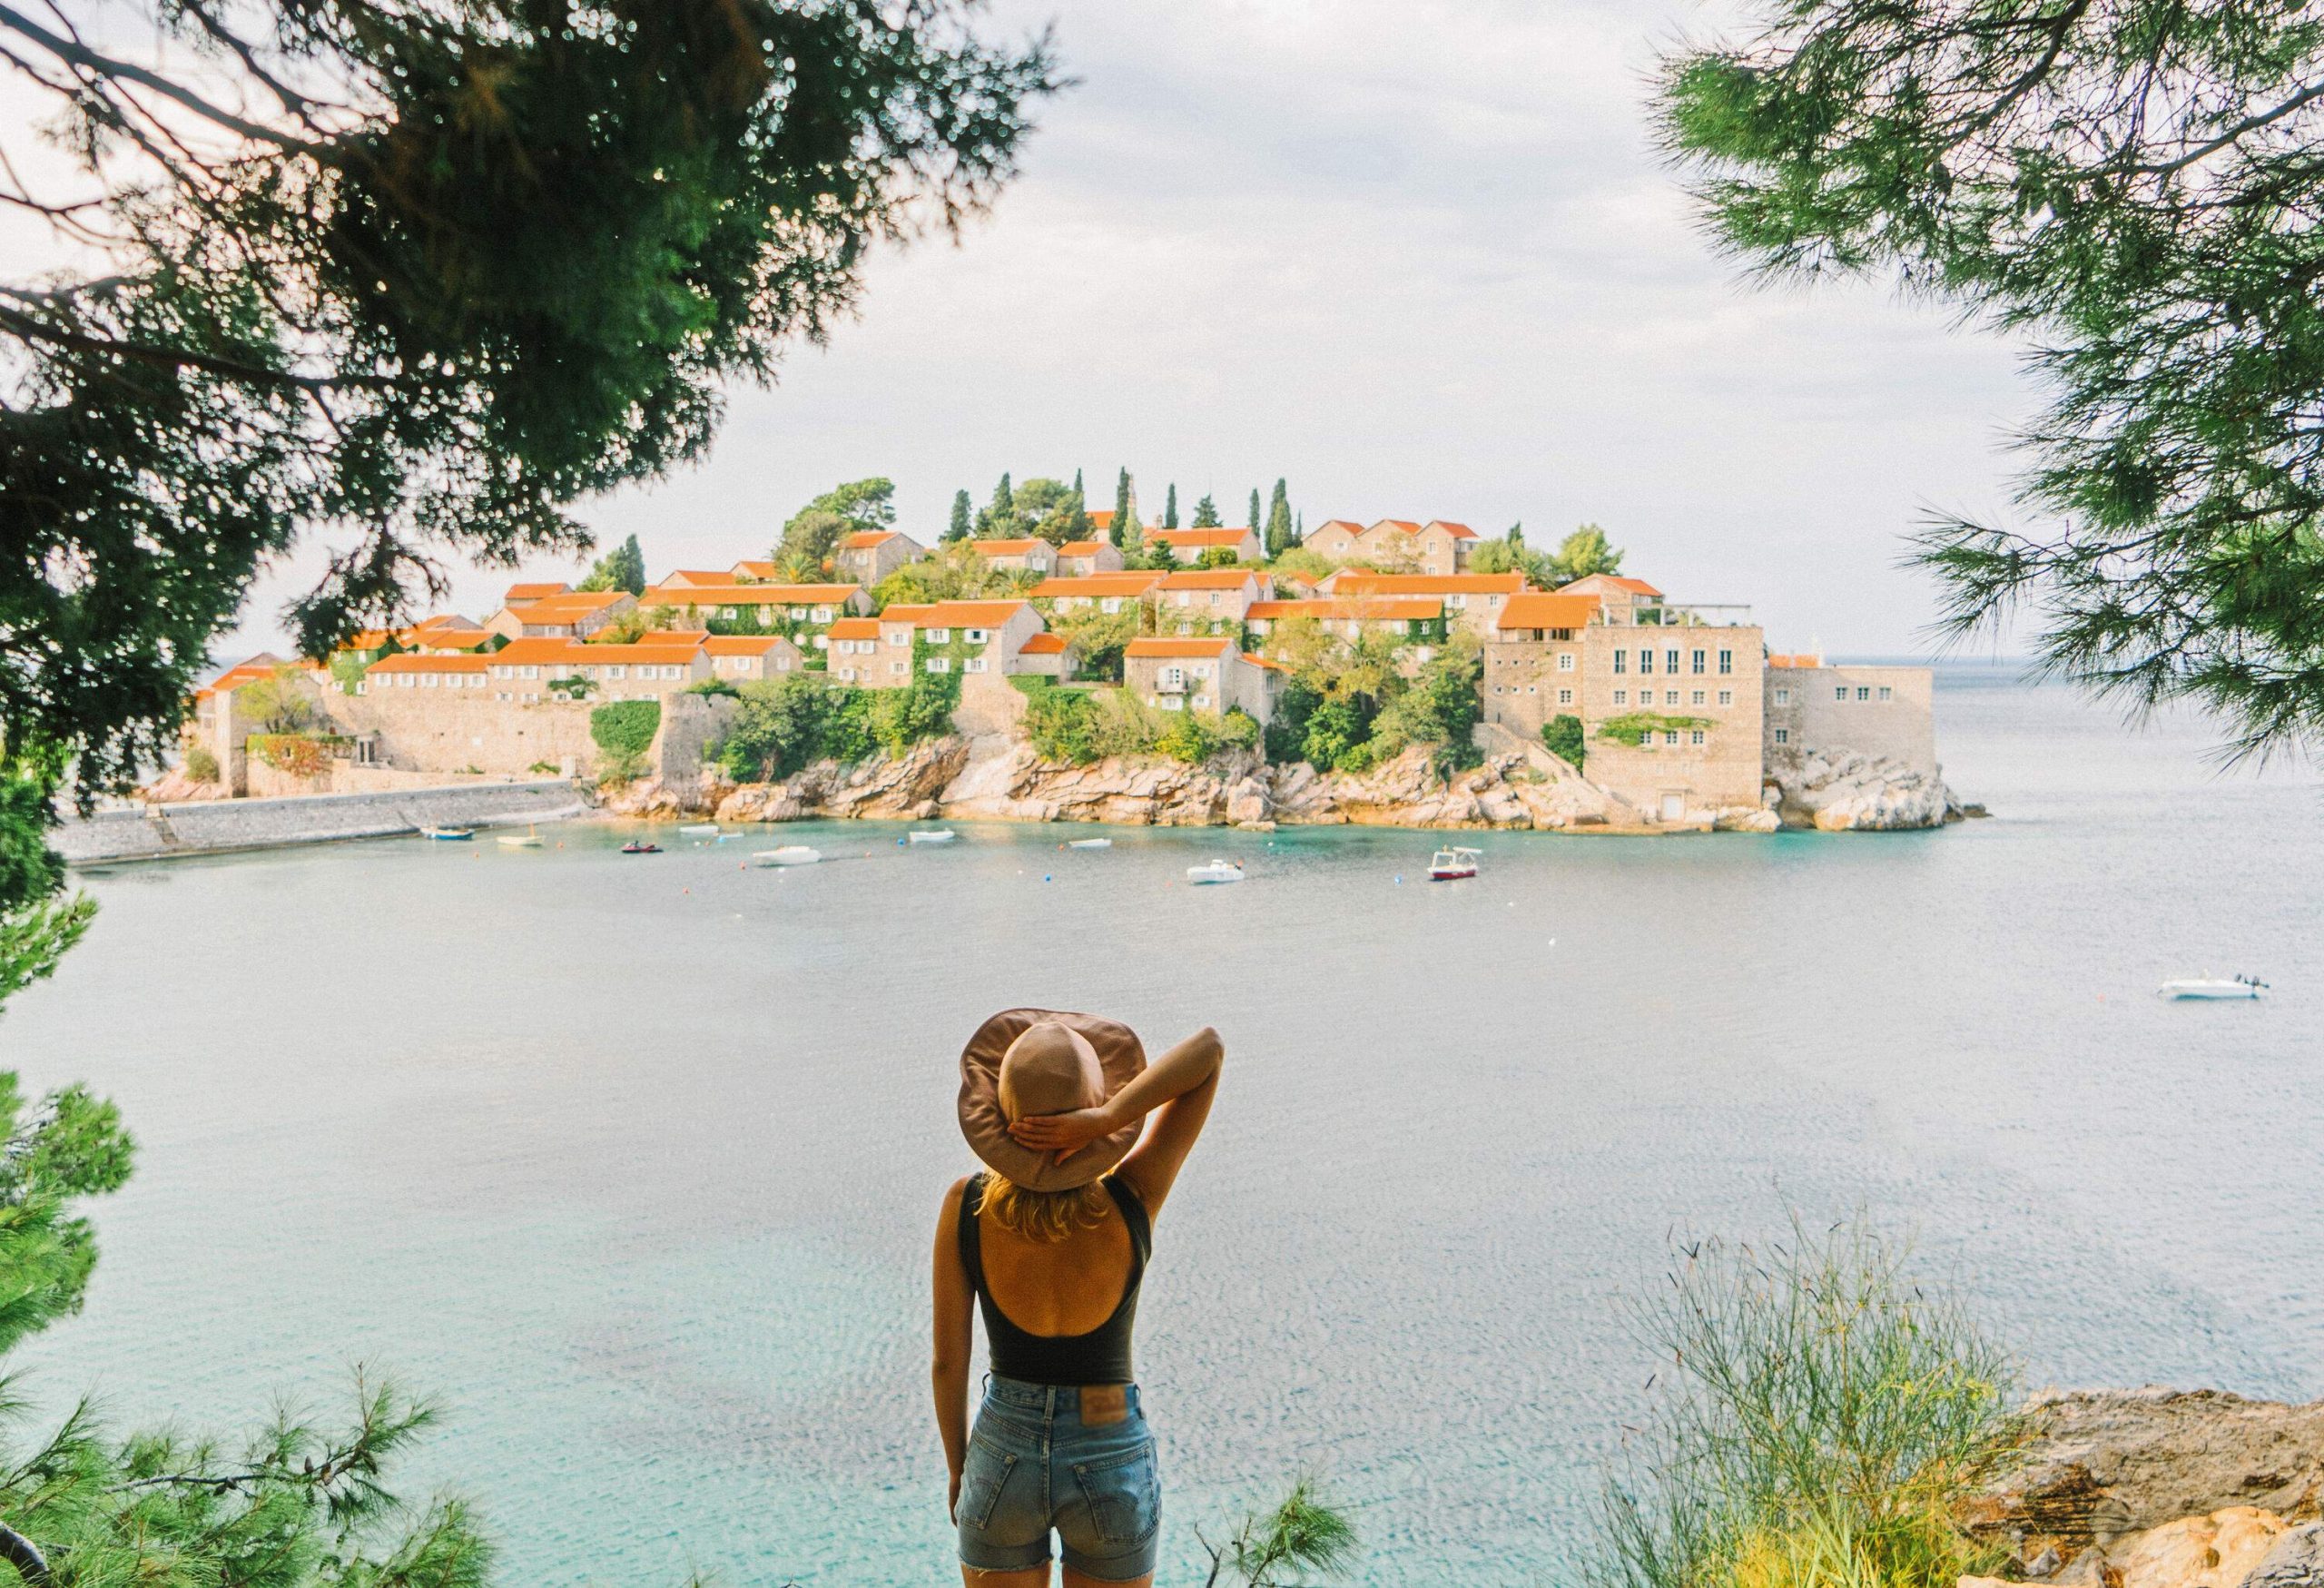 A captivating woman stood poised against the backdrop of the iconic Sveti Stefan island, a picturesque islet adorned with rustic stone buildings and embraced by crystal-clear turquoise waters.